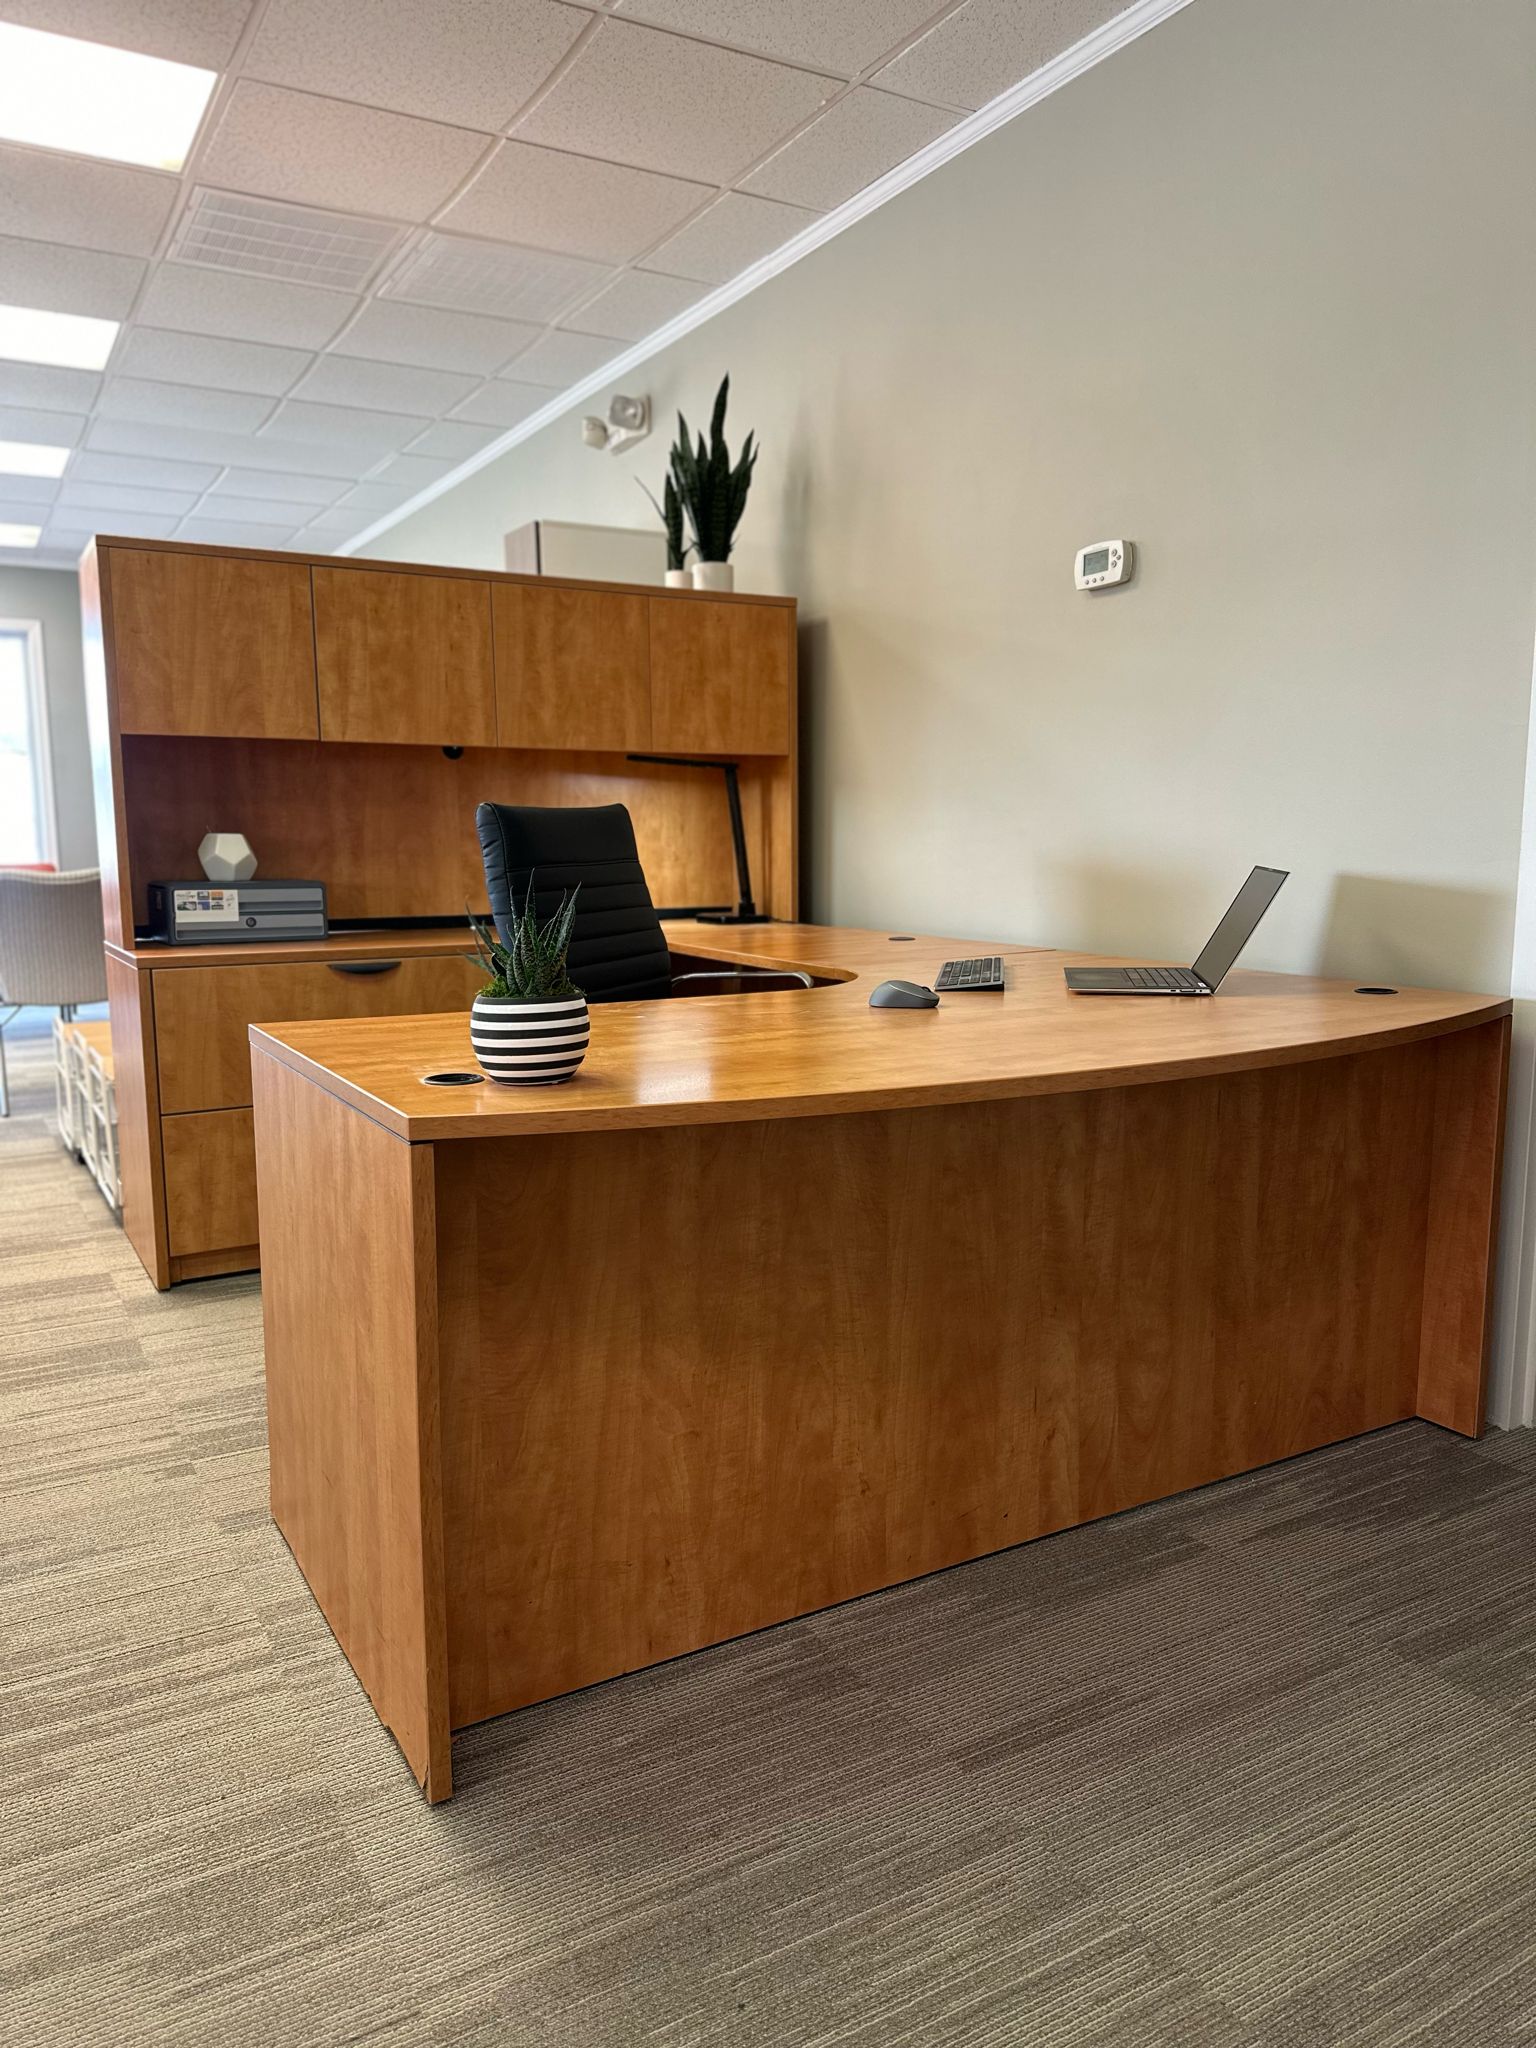 L Shape Desk showcased in a business retail store front for sale with light oak and attached hutch